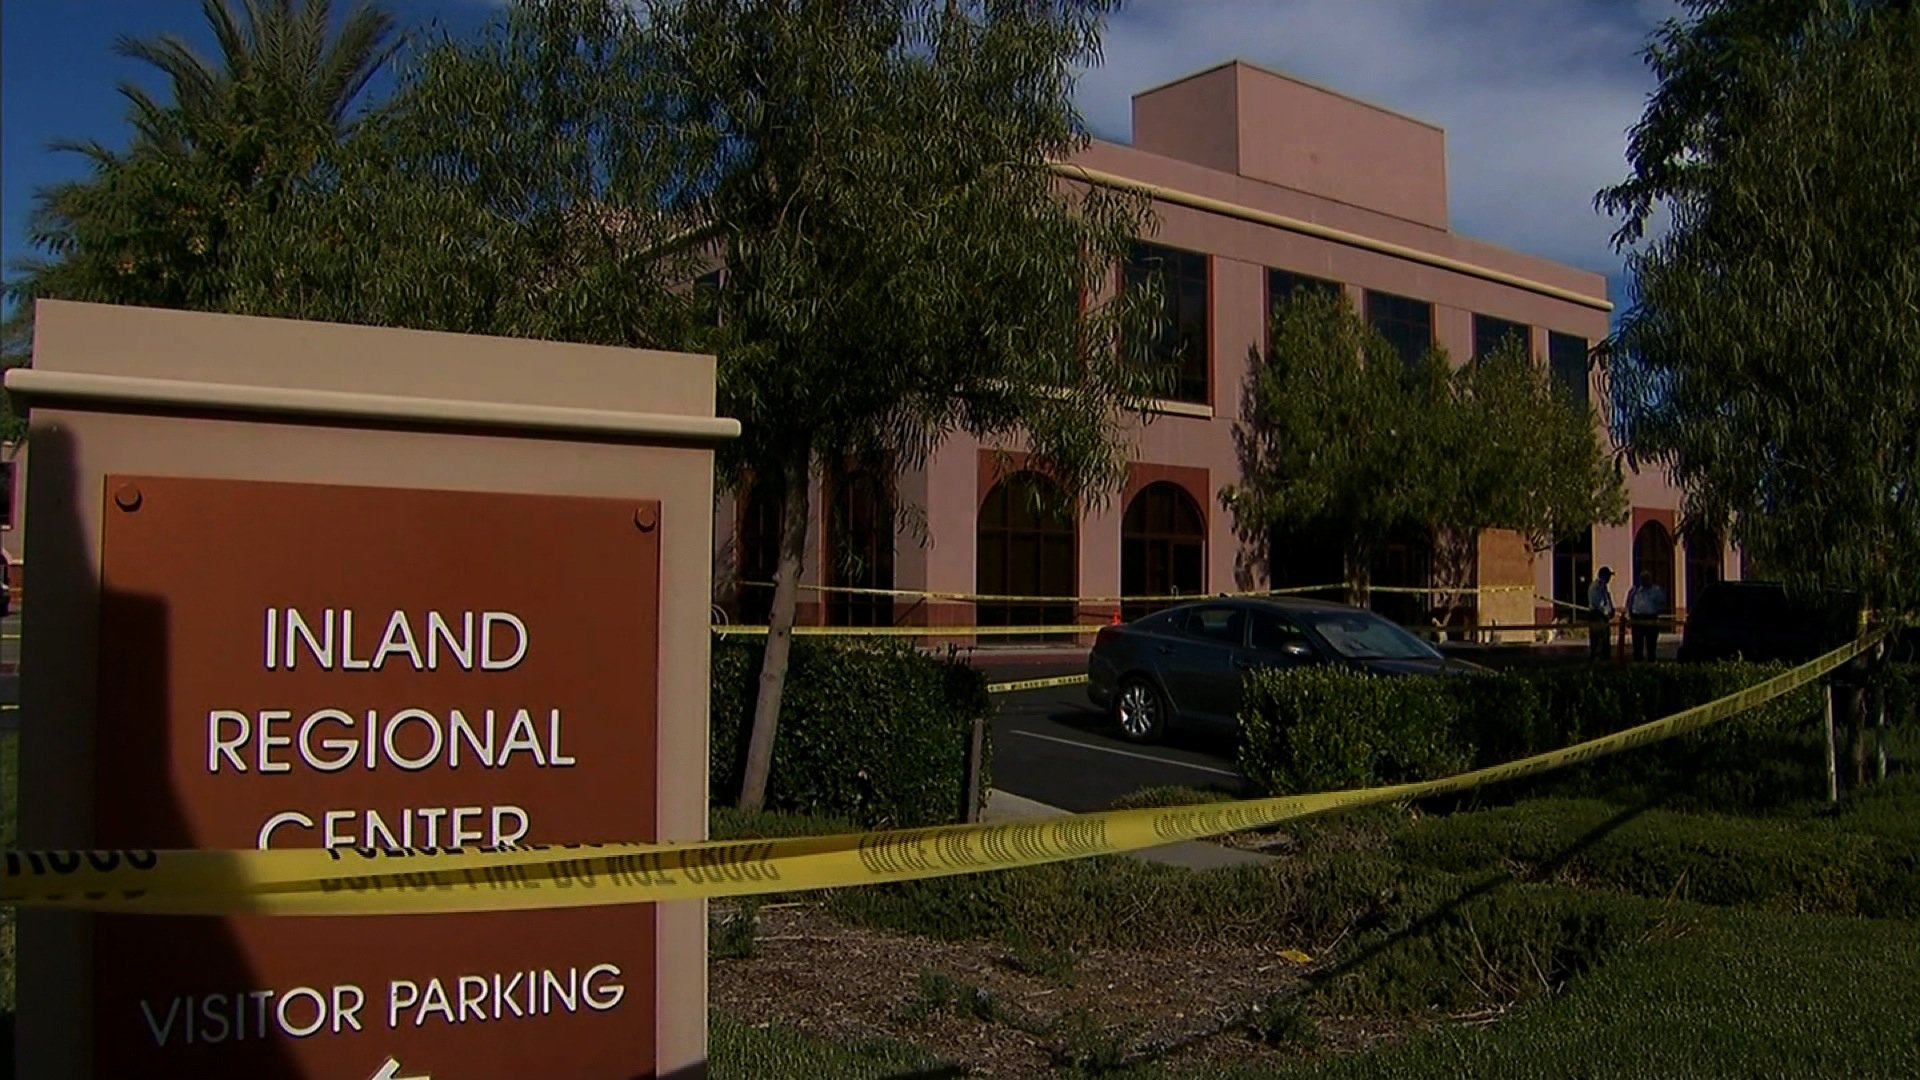 The Inland Regional Center is closed for investigation after Wednesday's shooting.